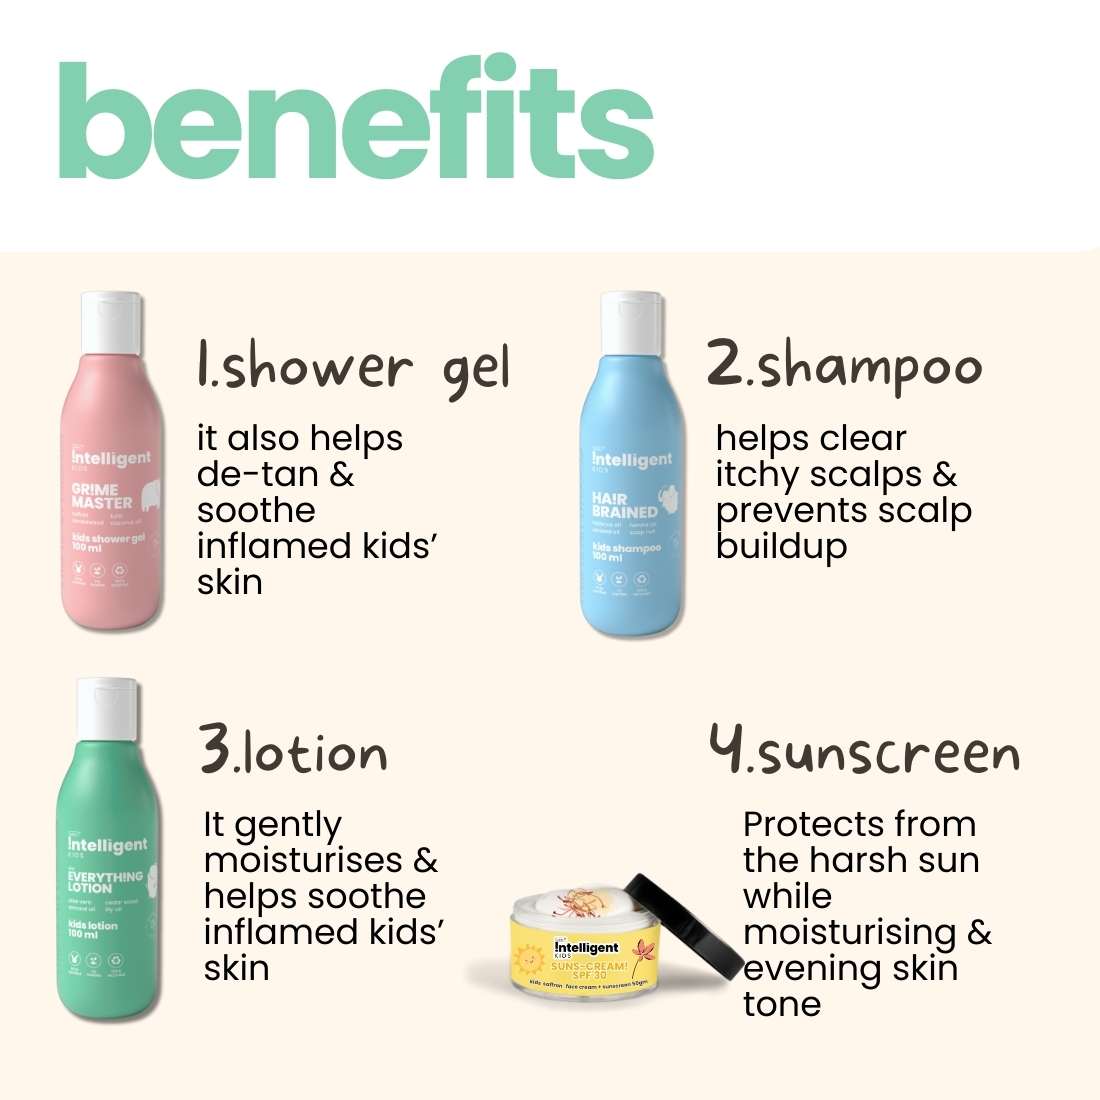 Intelligent Kids Mild Lotion, Body Wash, Shampoo, 100 ml X Pack of 3 Proven Effectiveness. Made with natural ingredients like Soapnut, henna, Body Wash: turmeric, Saffron. Lotion: virgin olive & lily oil, the range is formulated with nature’s super-botanicals, not chemical actives.